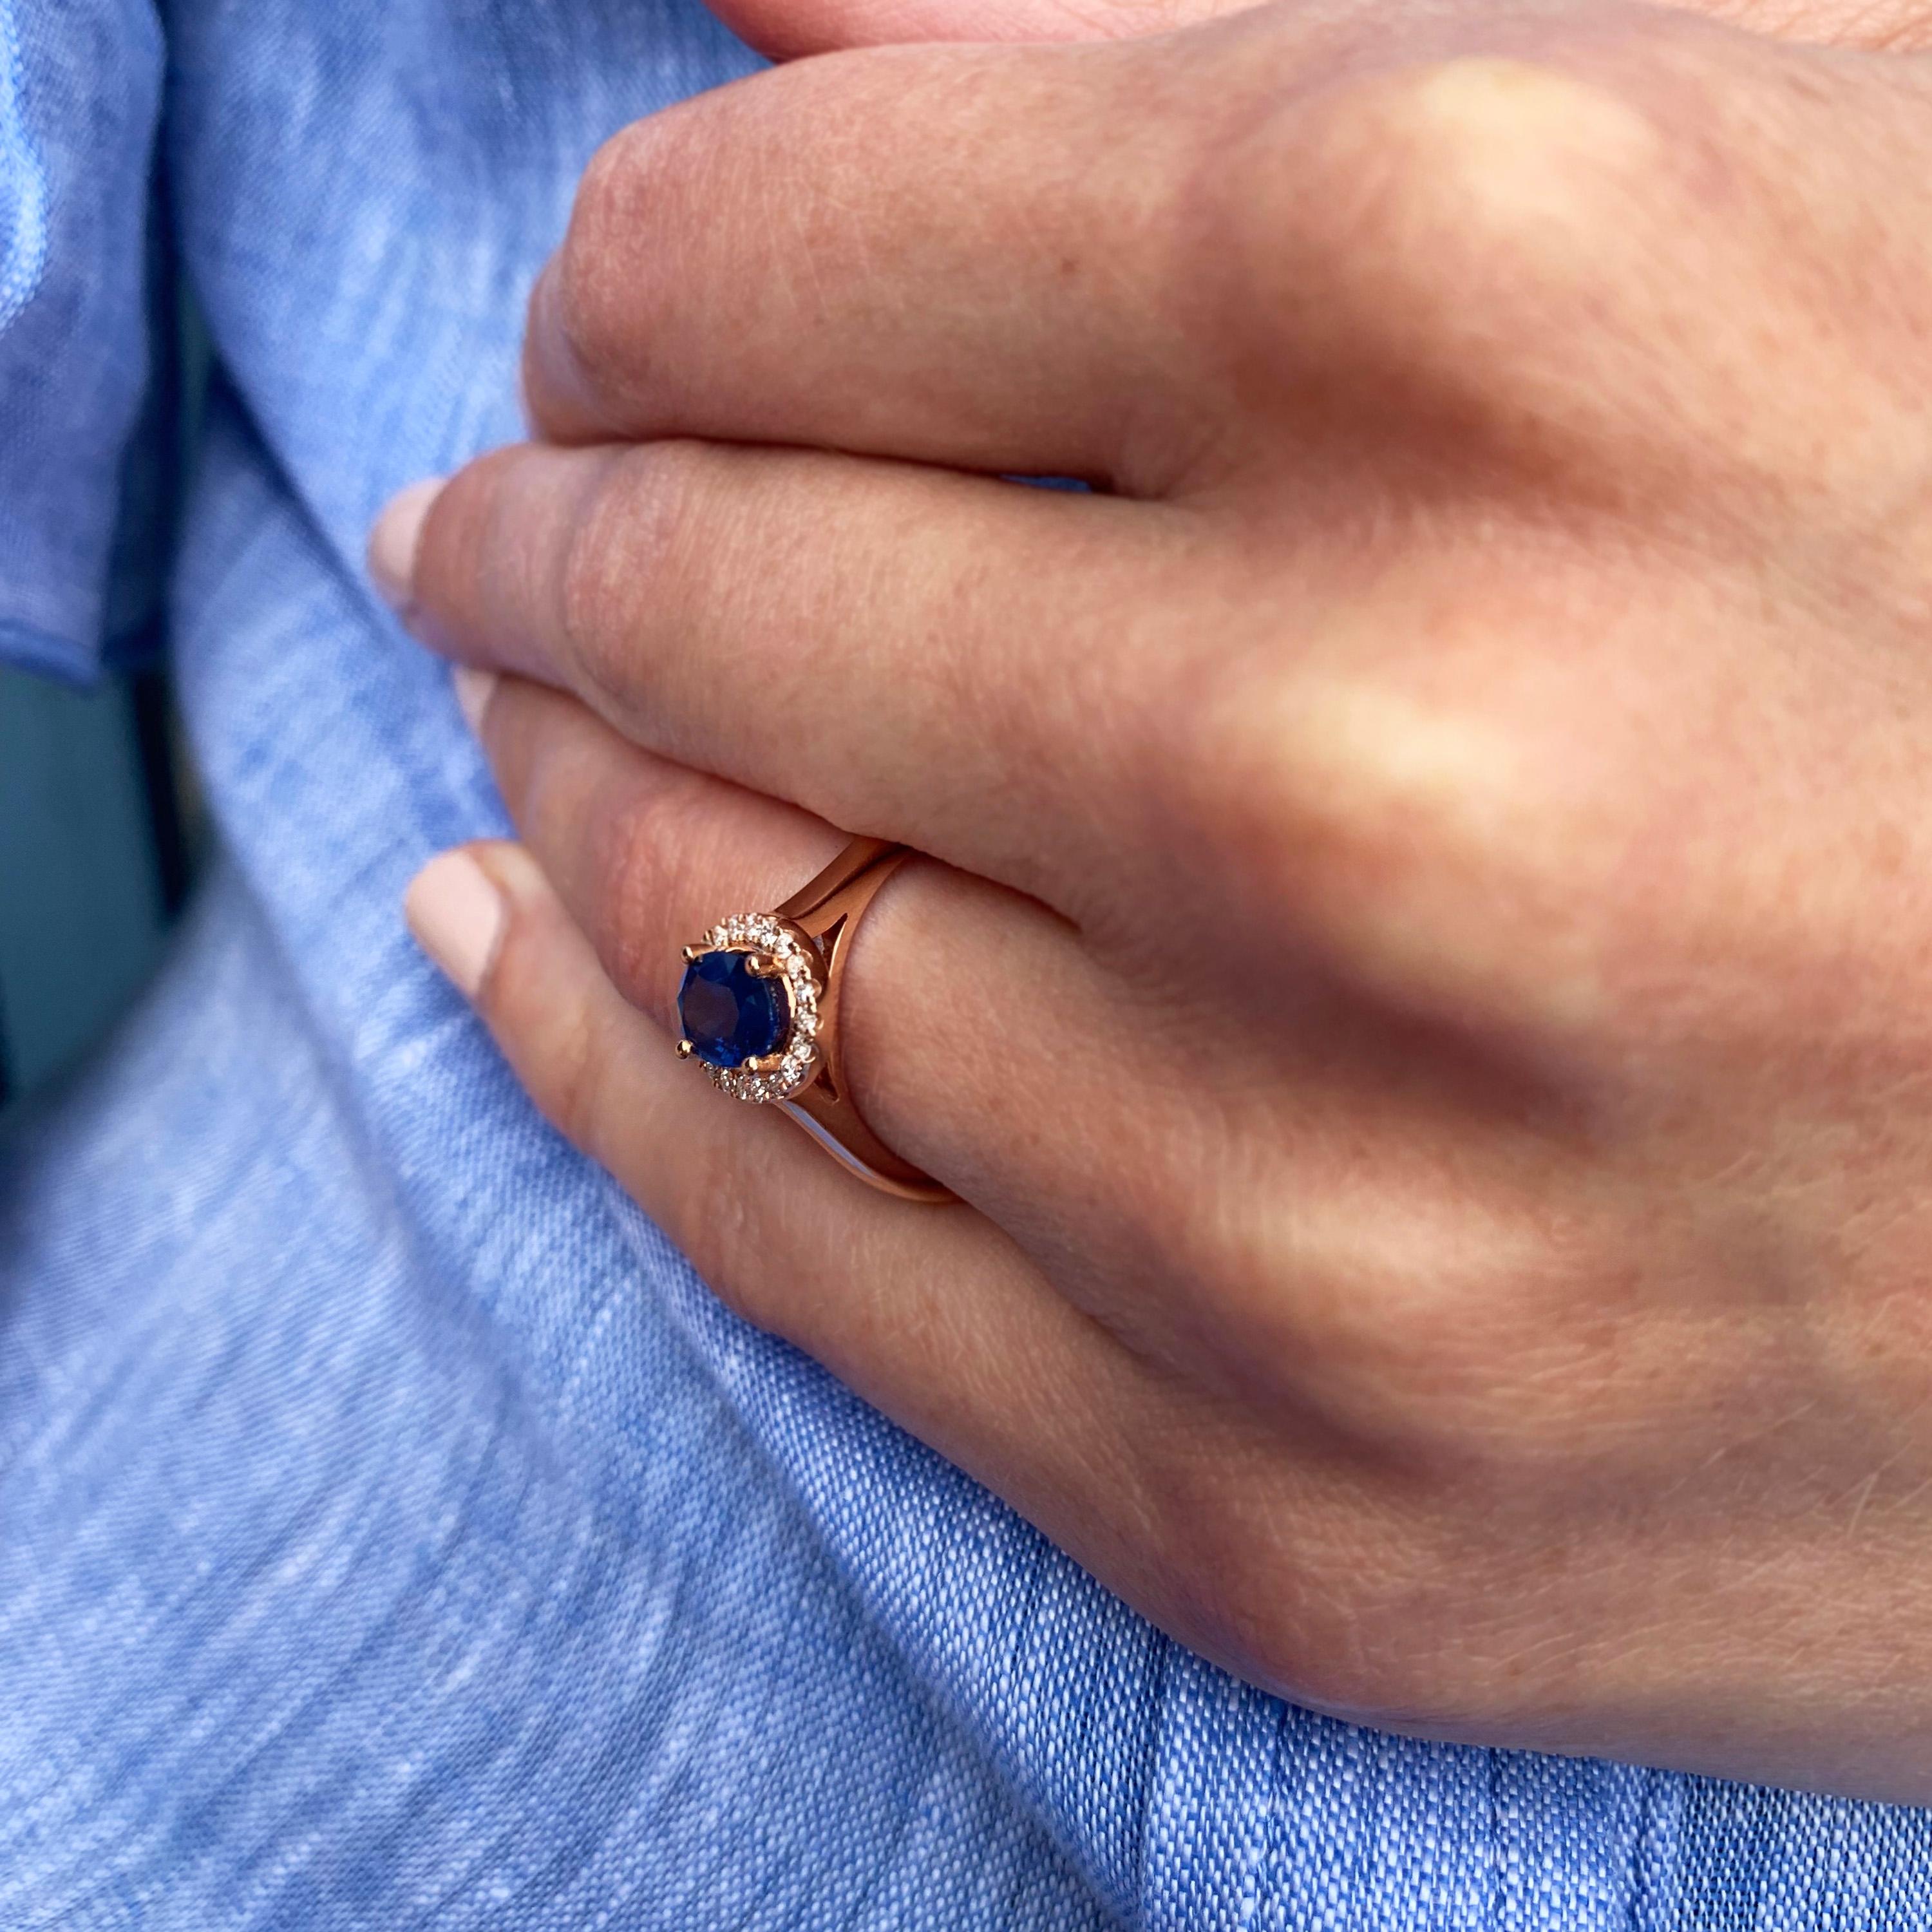 Handmade in 18k rose gold a unique engagement ring. Uniquely set in all 18k rose gold, this combination of deep blue and scintillating diamonds works so well. The oval sapphire (1.35ct) is framed perfectly by beautiful diamonds (0.13ct). Perfect as